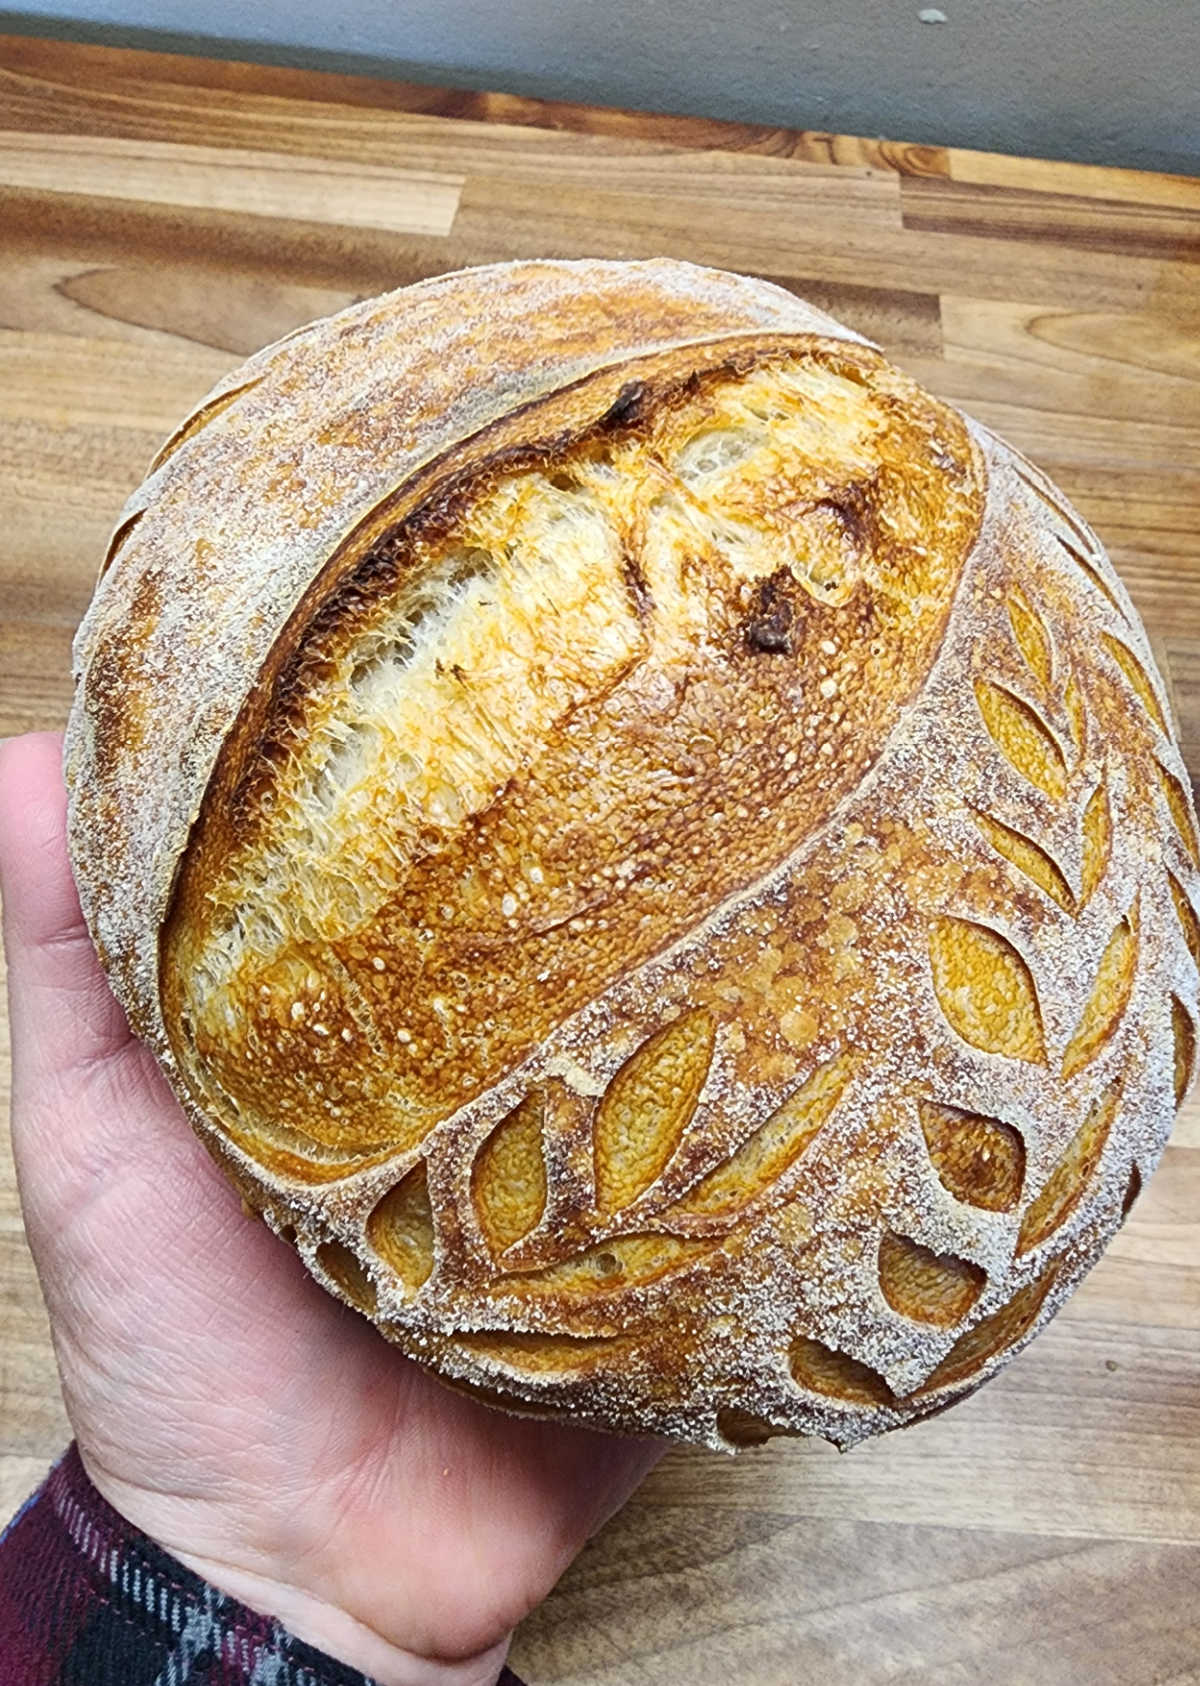 Loaf of sourdough bread in hands with wheat score marks.